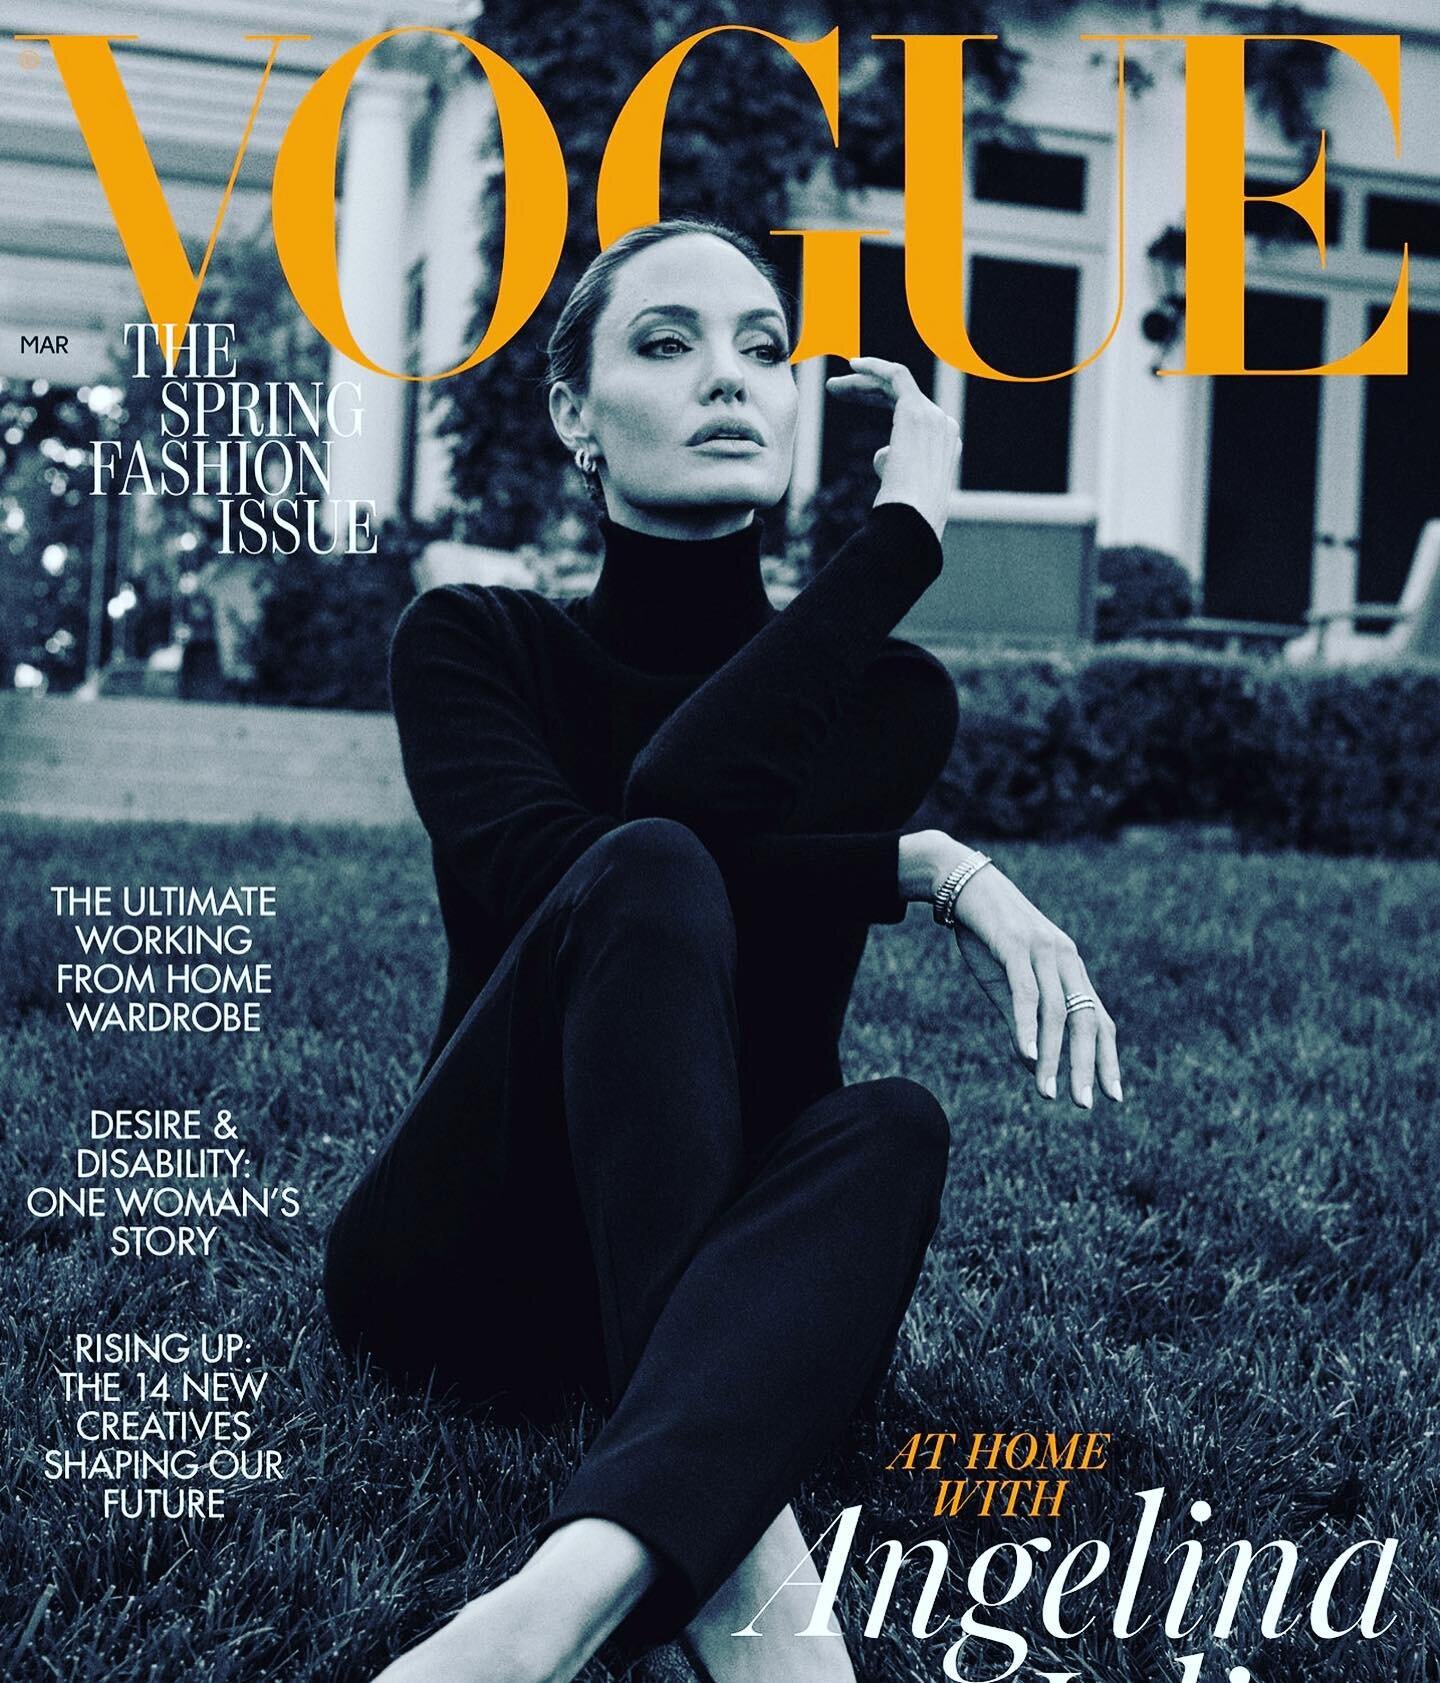 Today in &ldquo;Things I Could Not In a Million Years Have Predicted About My Life&rdquo;: This is the latest issue of British Vogue, and that middle headline on the giant picture of Angelina Jolie refers, wildly, to MY essay somewhere in these pages